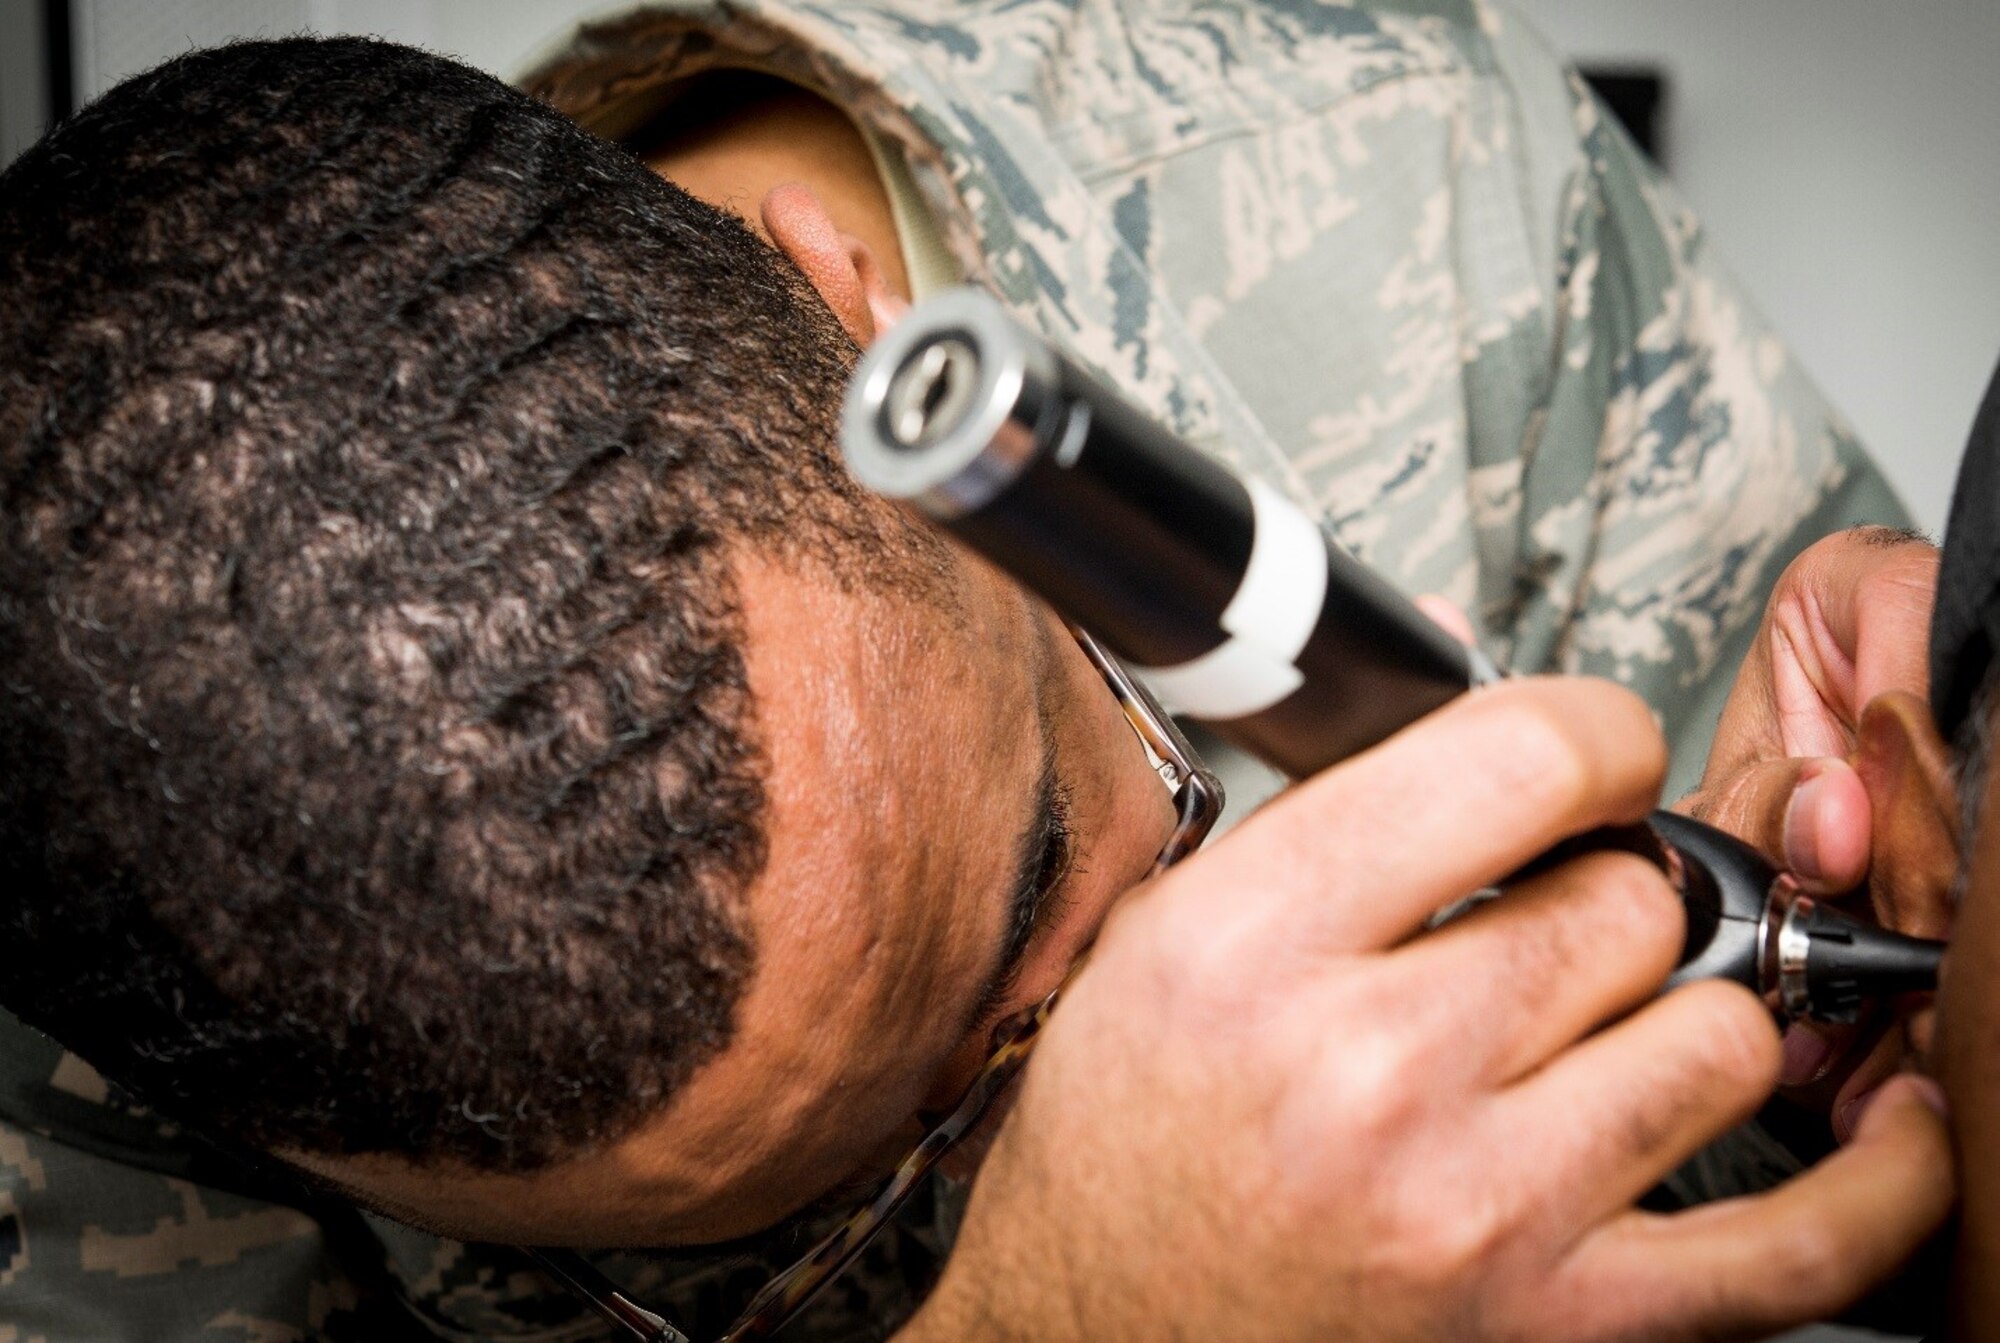 Maj. Ramone Williams, audiology element chief, 59th Medical Wing, Joint Base San Antonio-Lackland, Texas, examines a patient’s ear canal during a screening, Jan. 24, 2018. The audiology clinic is the largest of its kind Air Force-wide and supports over 200,000 retirees, dependents, and military personnel. (U.S. Air Force photo by Senior Airman Keifer Bowes)